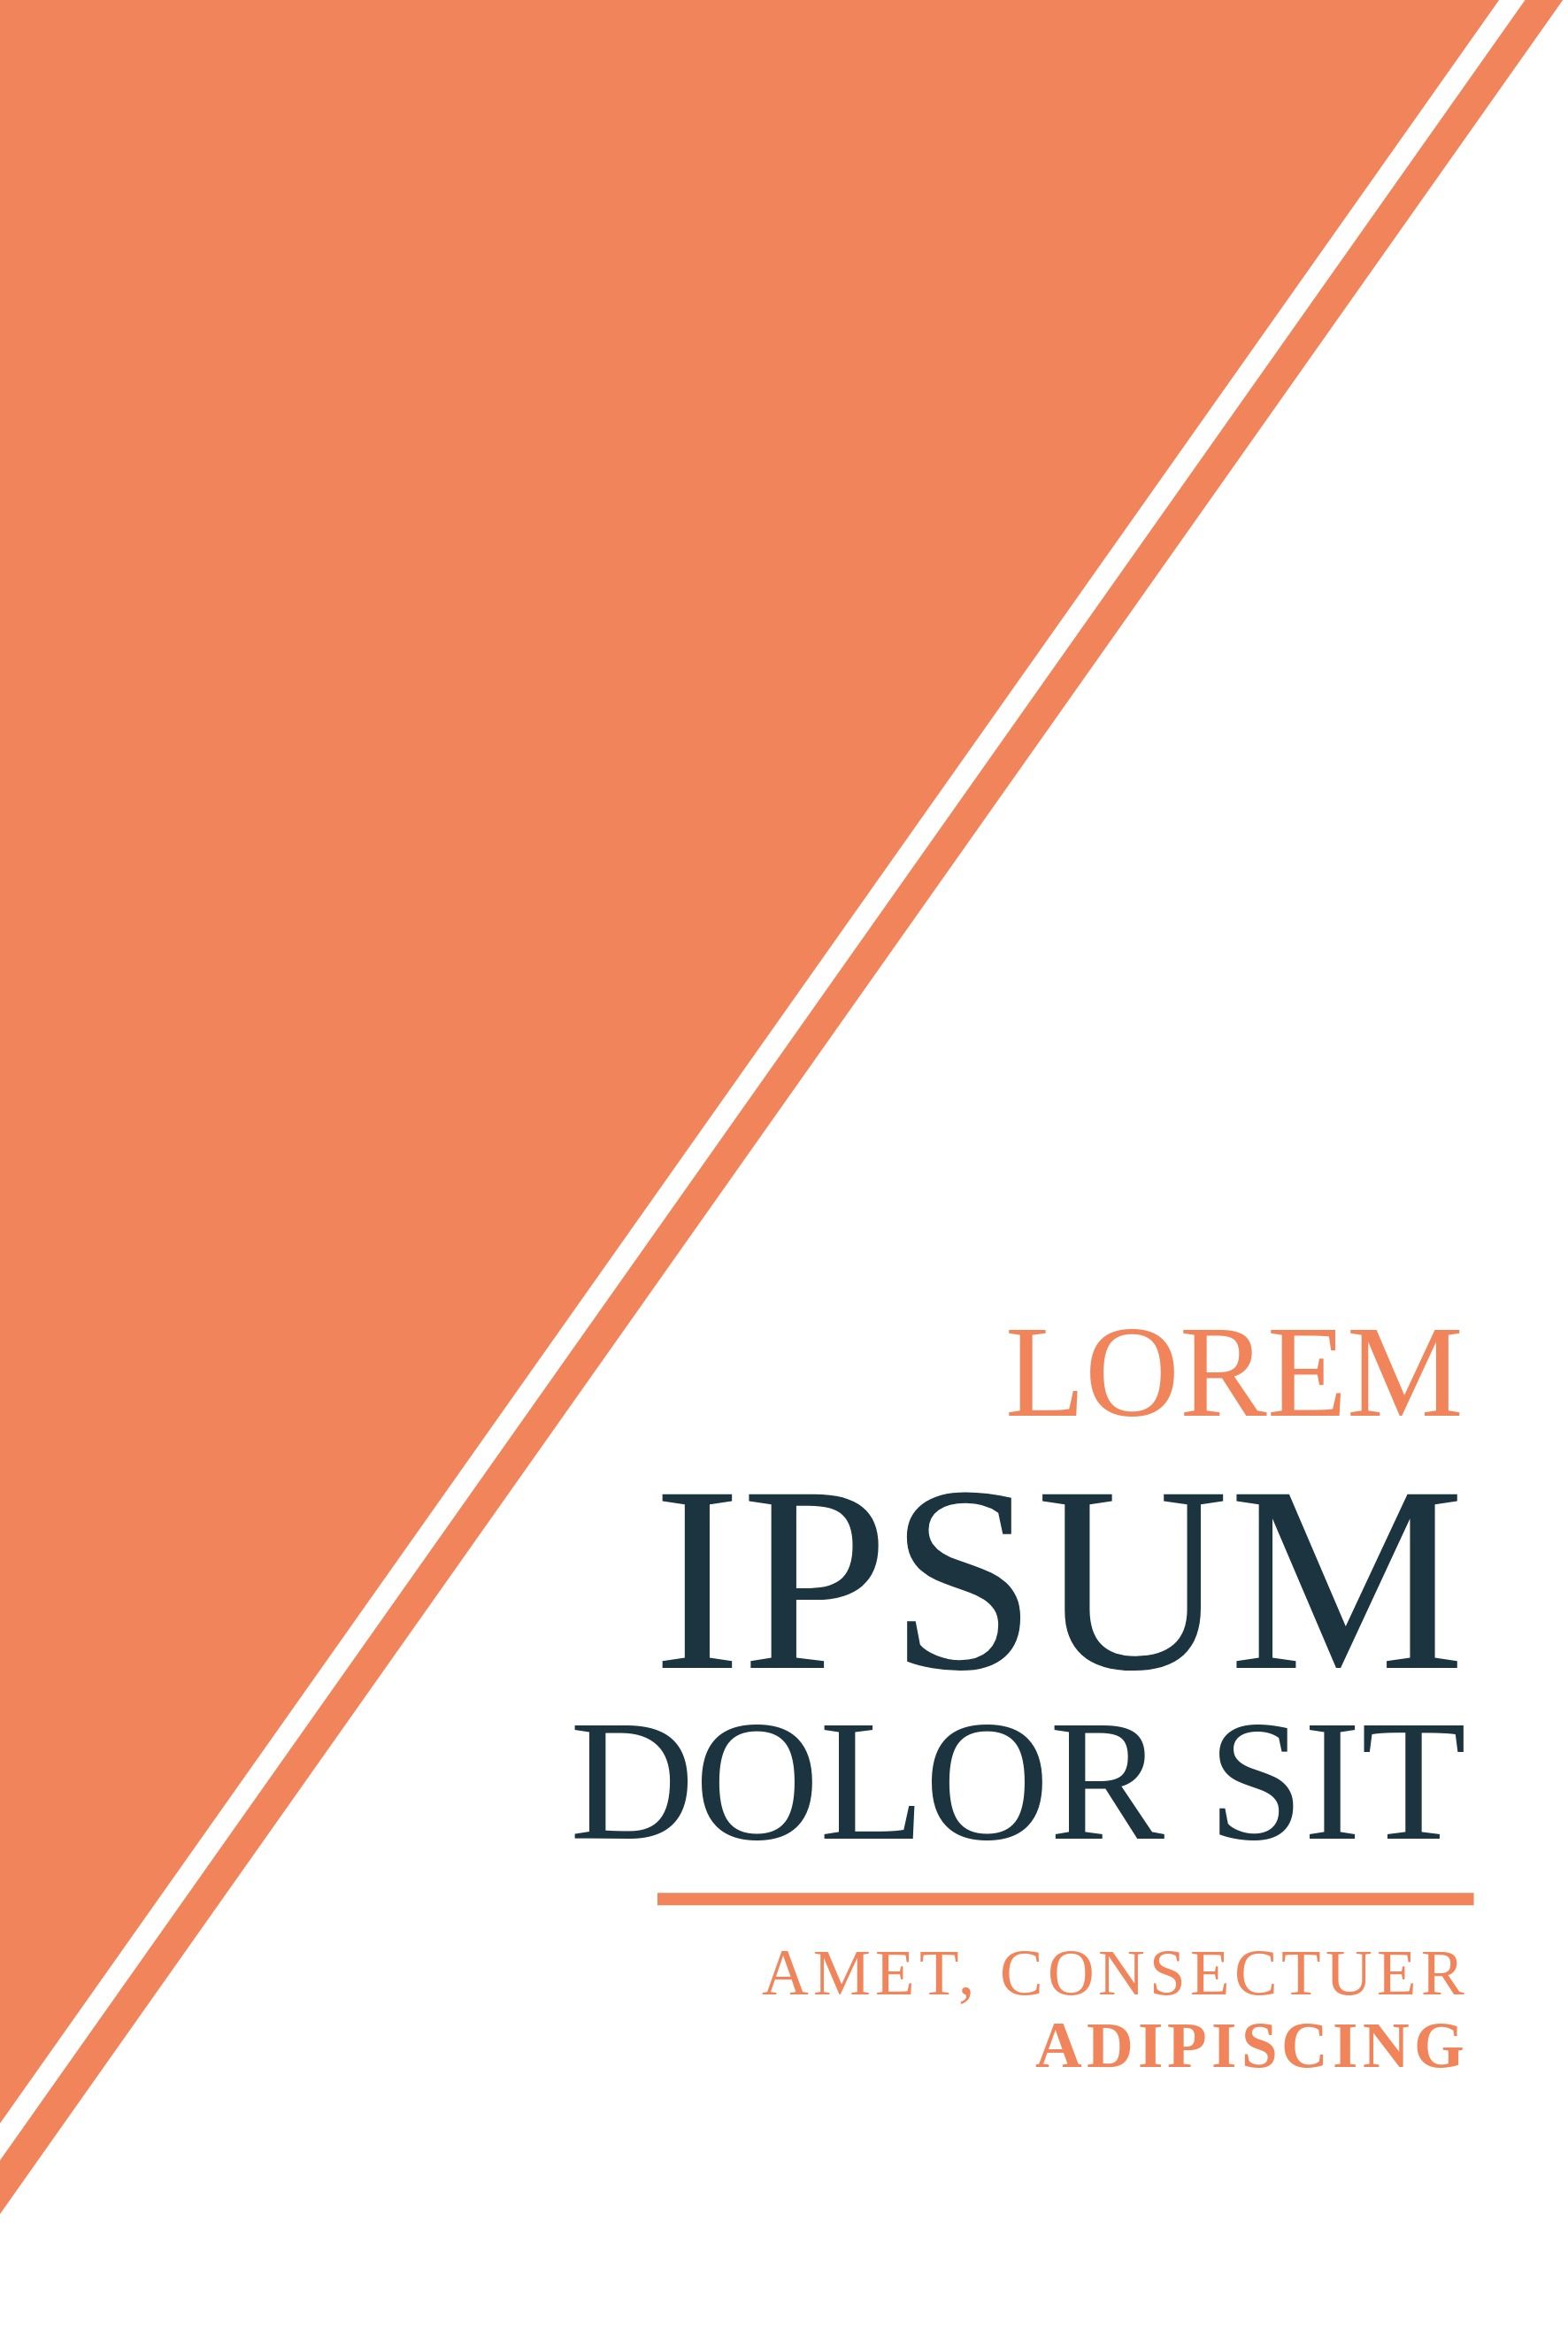 Book cover template with lorem ipsum text to be edited - Eight fundamental inbound marketing strategies & tactics to grow your business - Image